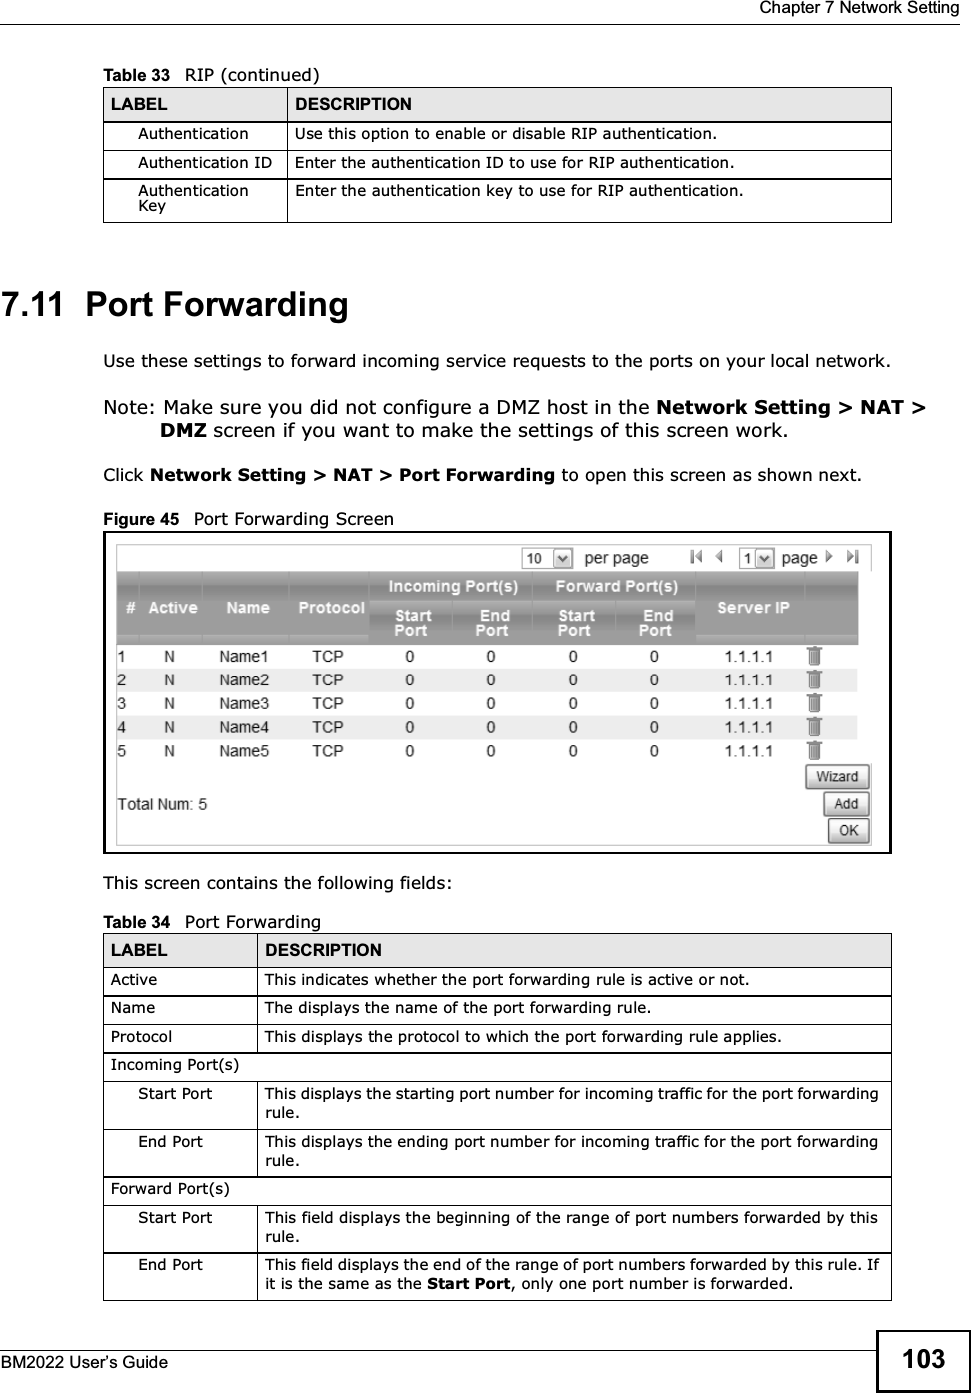  Chapter 7 Network SettingBM2022 Users Guide 1037.11  Port ForwardingUse these settings to forward incoming service requests to the ports on your local network.Note: Make sure you did not configure a DMZ host in the Network Setting &gt; NAT &gt; DMZ screen if you want to make the settings of this screen work.Click Network Setting &gt; NAT &gt; Port Forwarding to open this screen as shown next.Figure 45   Port Forwarding ScreenThis screen contains the following fields:Authentication Use this option to enable or disable RIP authentication.Authentication ID Enter the authentication ID to use for RIP authentication.Authentication KeyEnter the authentication key to use for RIP authentication.Table 33   RIP (continued)LABEL DESCRIPTIONTable 34   Port ForwardingLABEL DESCRIPTIONActive This indicates whether the port forwarding rule is active or not.Name The displays the name of the port forwarding rule.Protocol This displays the protocol to which the port forwarding rule applies.Incoming Port(s)Start Port This displays the starting port number for incoming traffic for the port forwarding rule.End Port This displays the ending port number for incoming traffic for the port forwarding rule.Forward Port(s)Start Port This field displays the beginning of the range of port numbers forwarded by this rule.End Port This field displays the end of the range of port numbers forwarded by this rule. If it is the same as the Start Port, only one port number is forwarded.